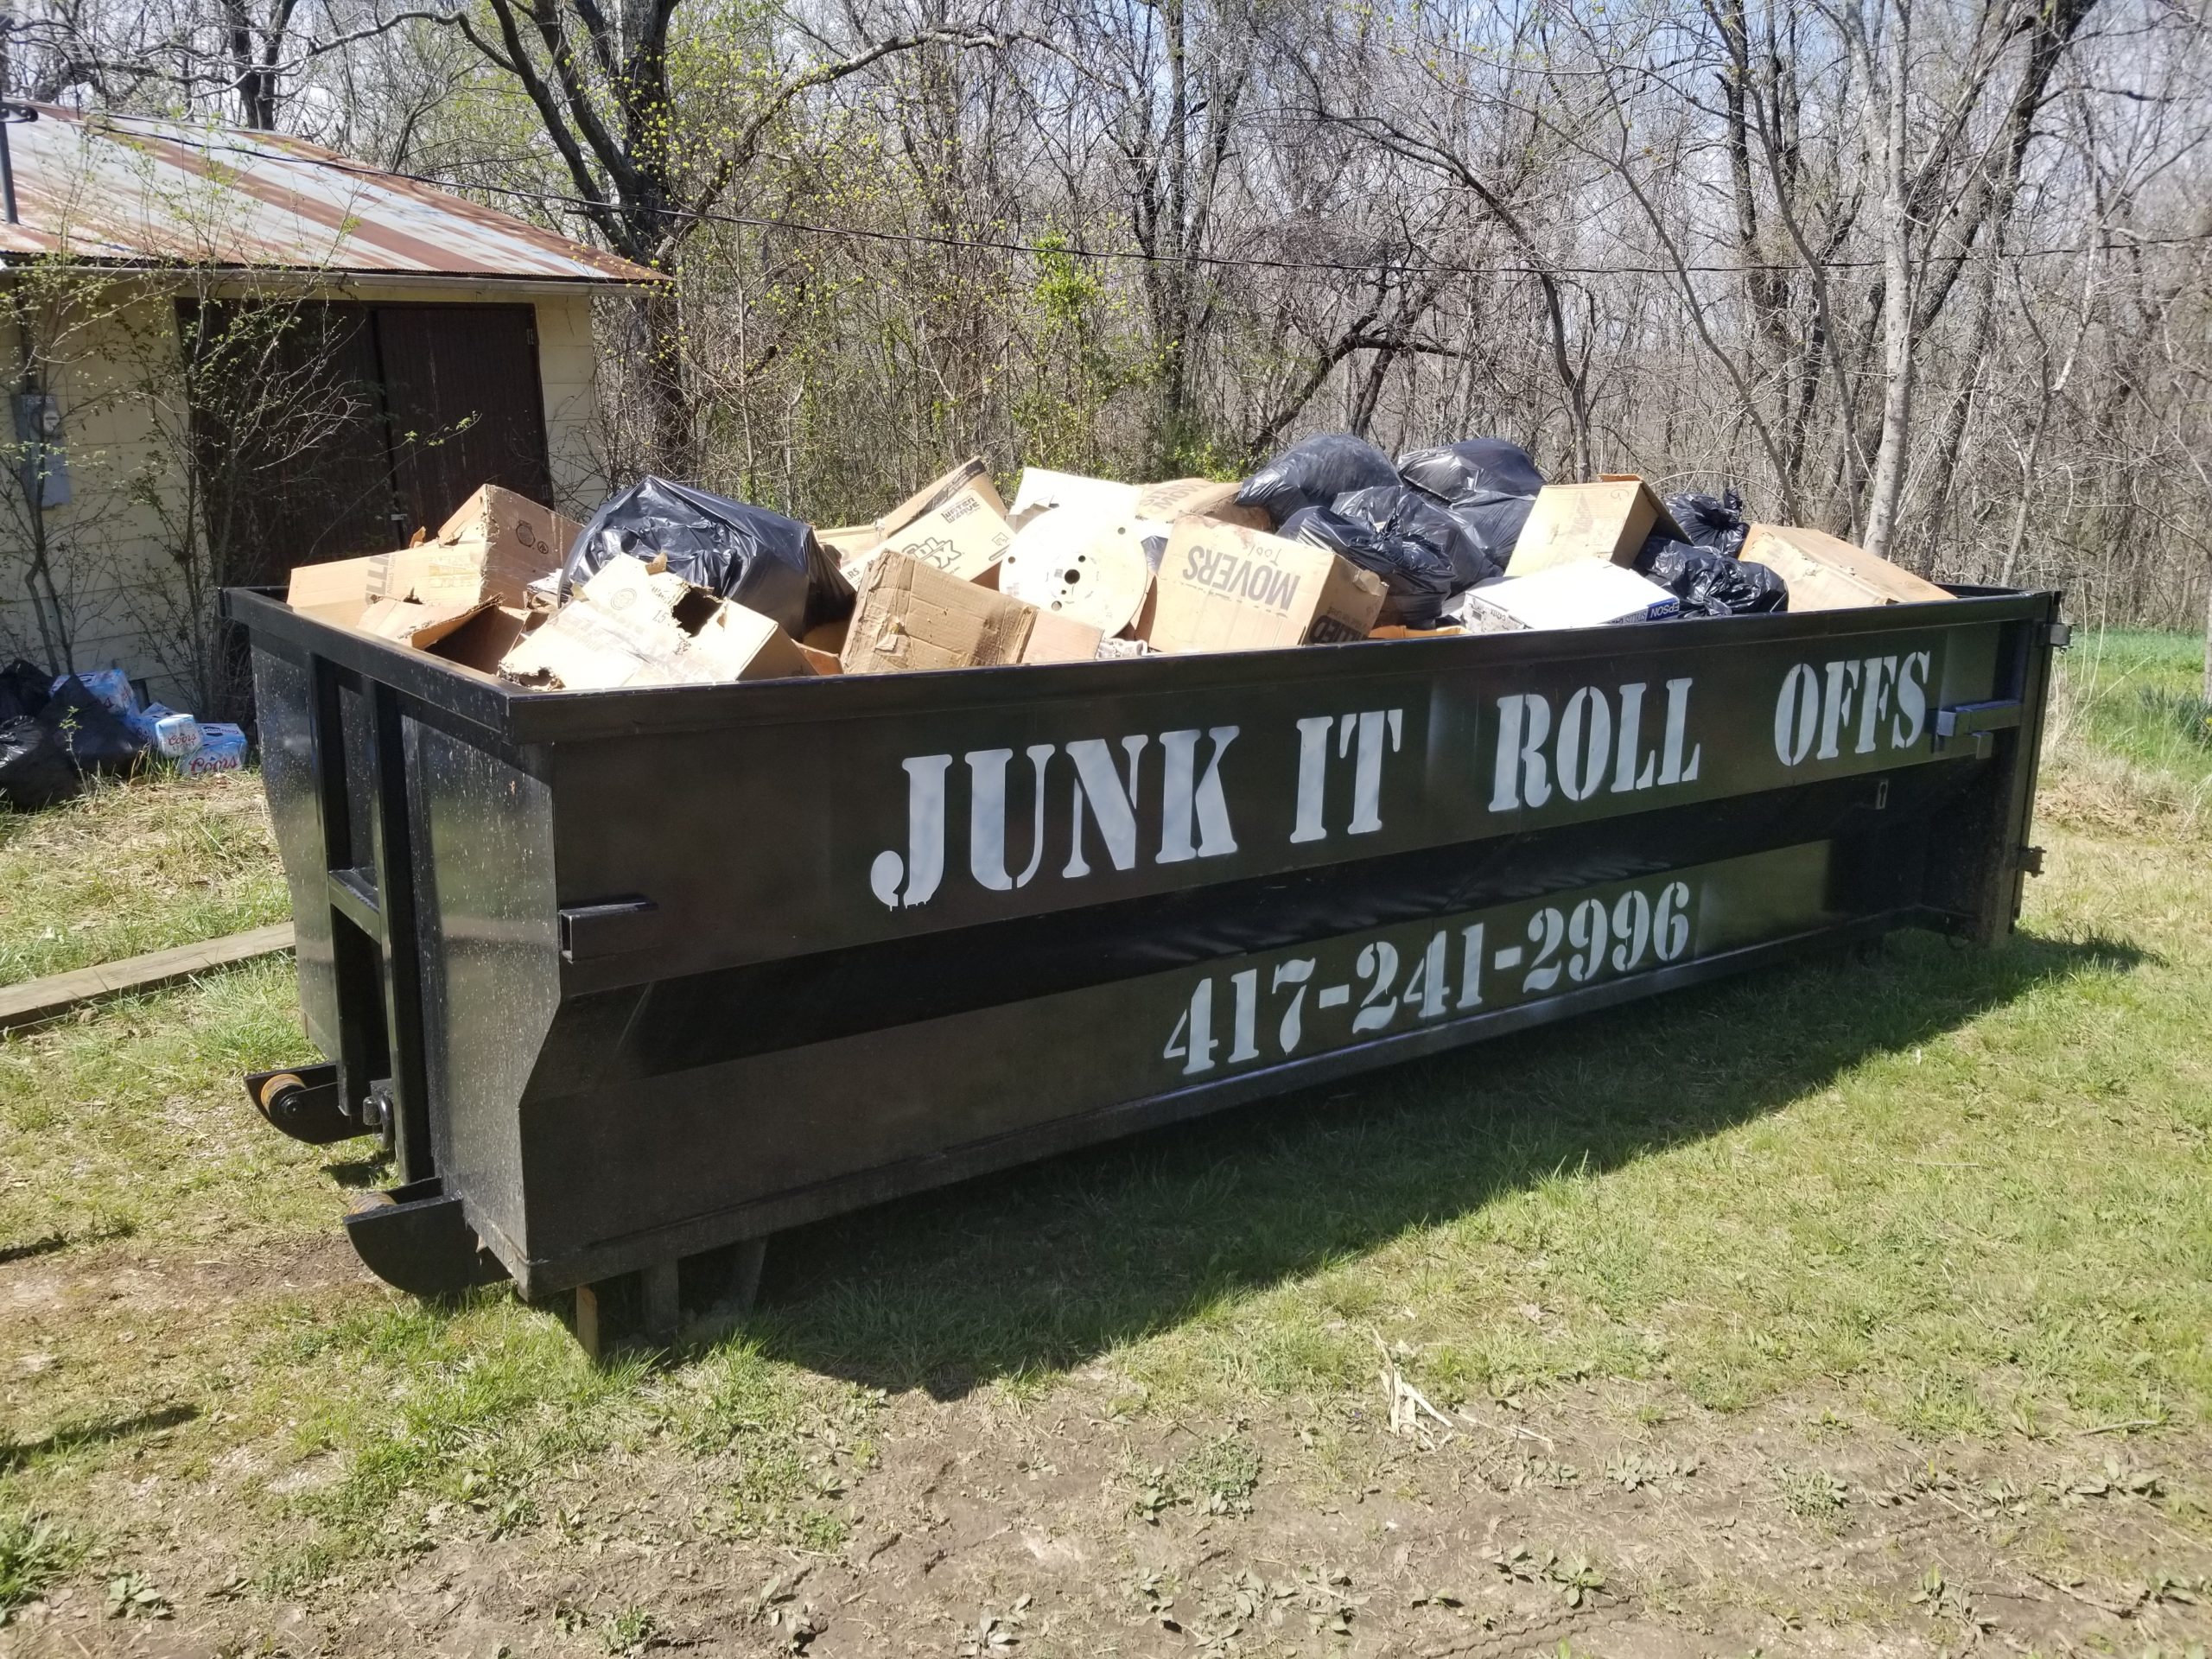 Home clean up in southwest mo, best dumpster rental services, junk it roll offs